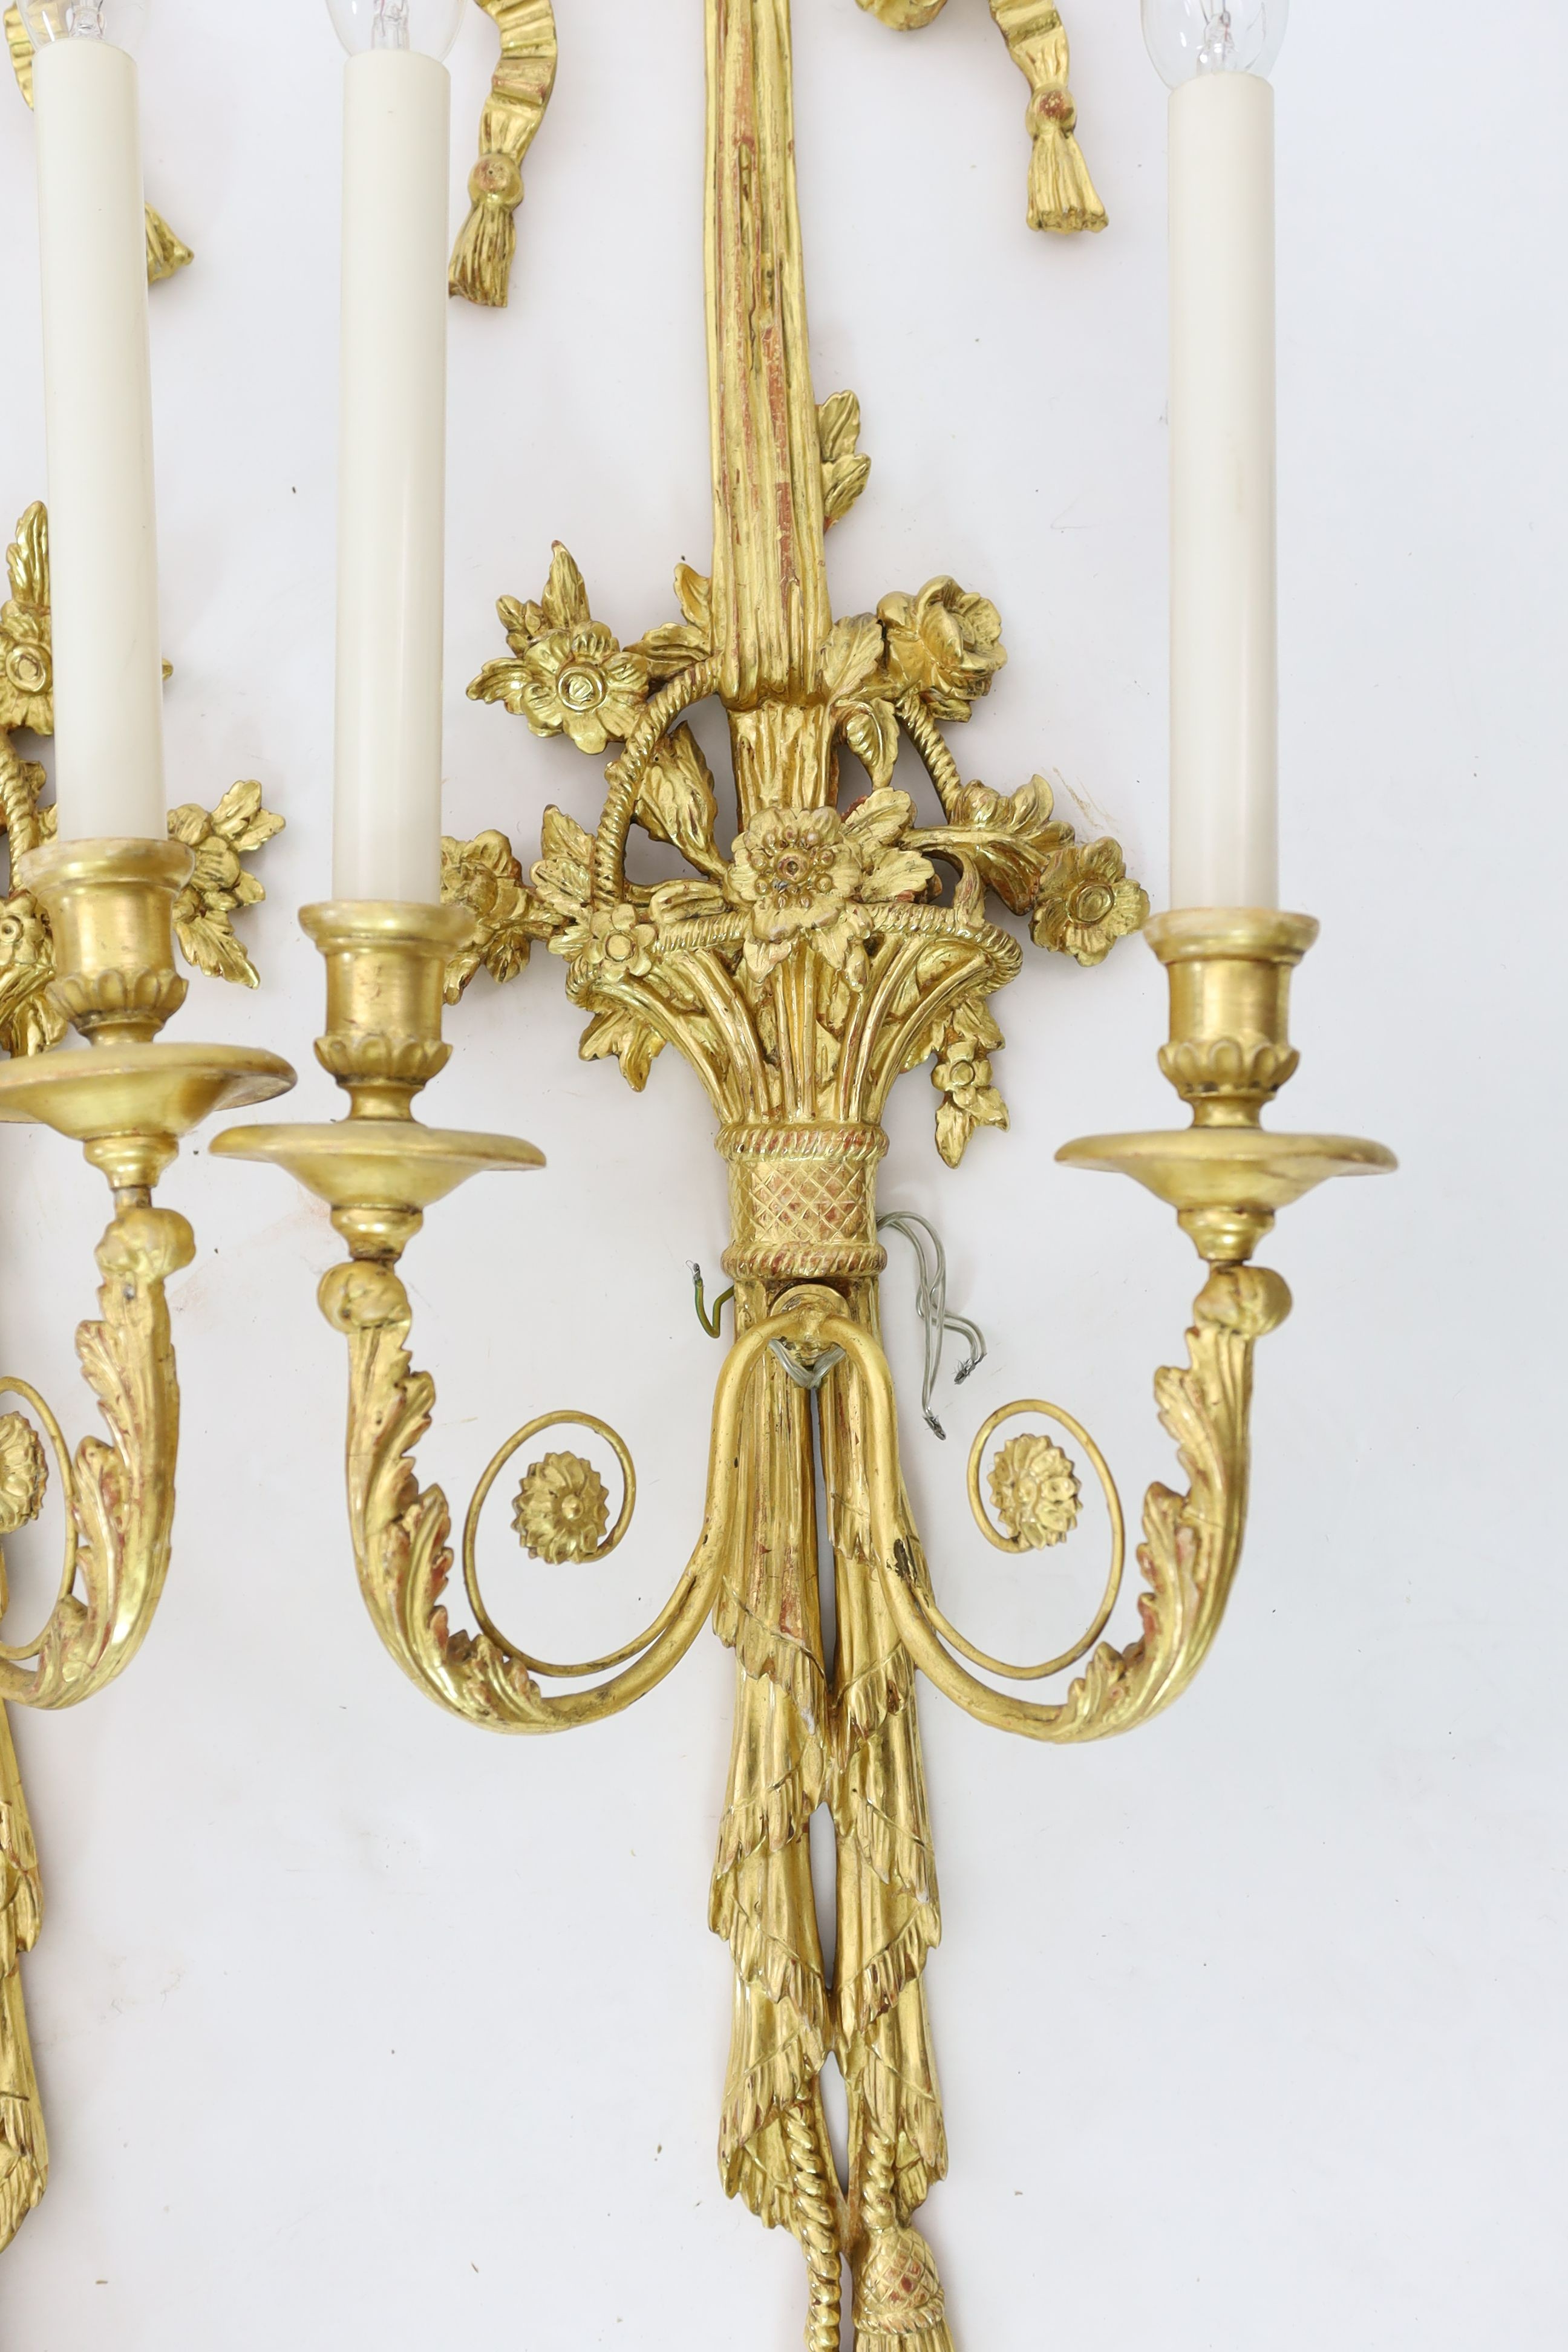 A pair of Louis XVI style carved giltwood wall lights, with ribbon crests and flowers in basket stems, over tasselled bases, height 85cm